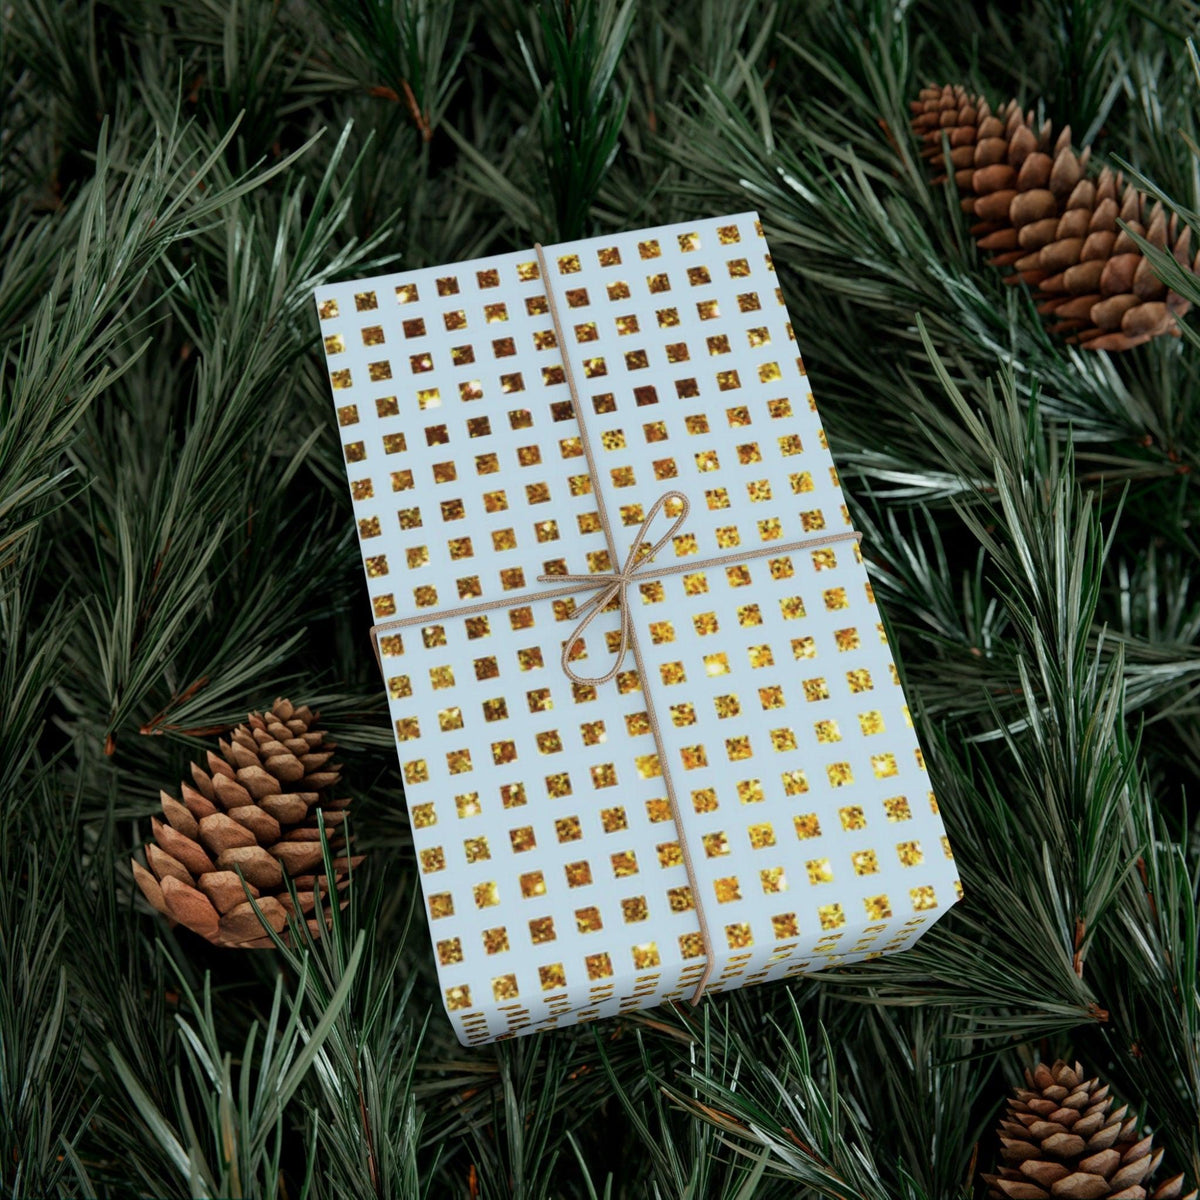 Sea Foam and Gold Square Gift Wrap Paper Christmas Wrapping Paper Gift for Anniversary Paper Wrap Sea Foam Gold Squares Gift Wrap Custom - The Ripple Effect Co.US